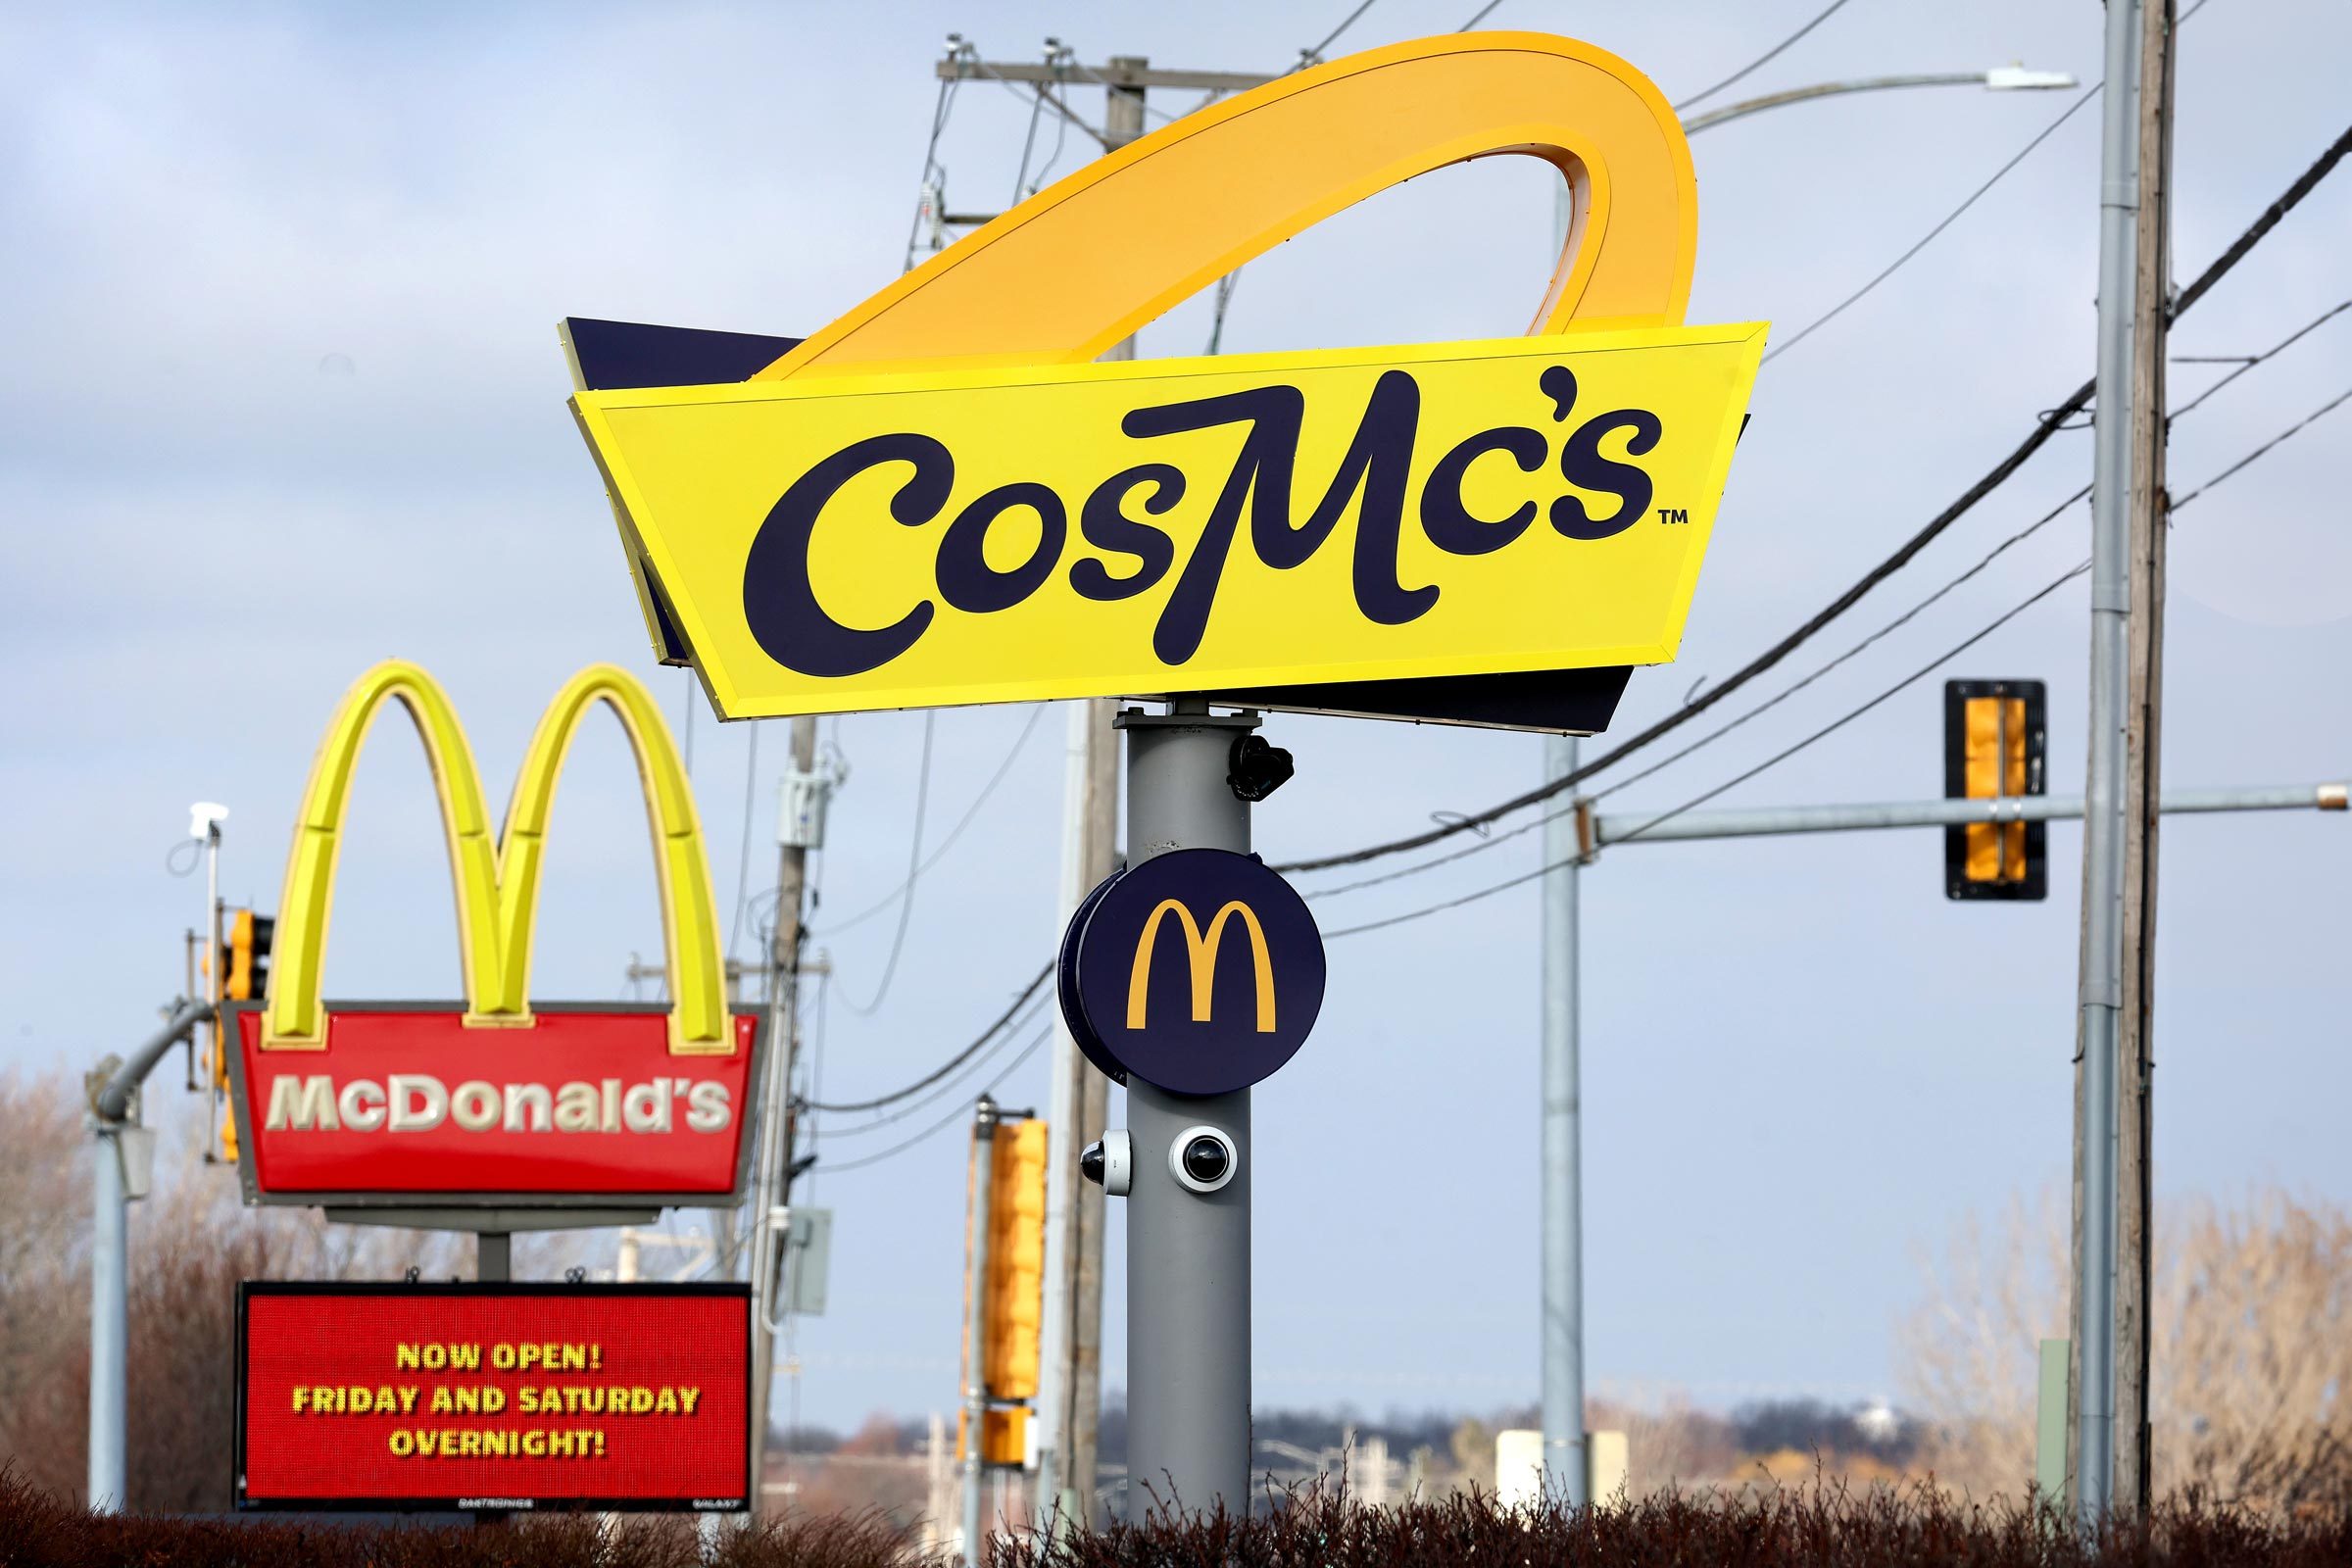 Cosmcs street sign and mcdonalds sign in the background